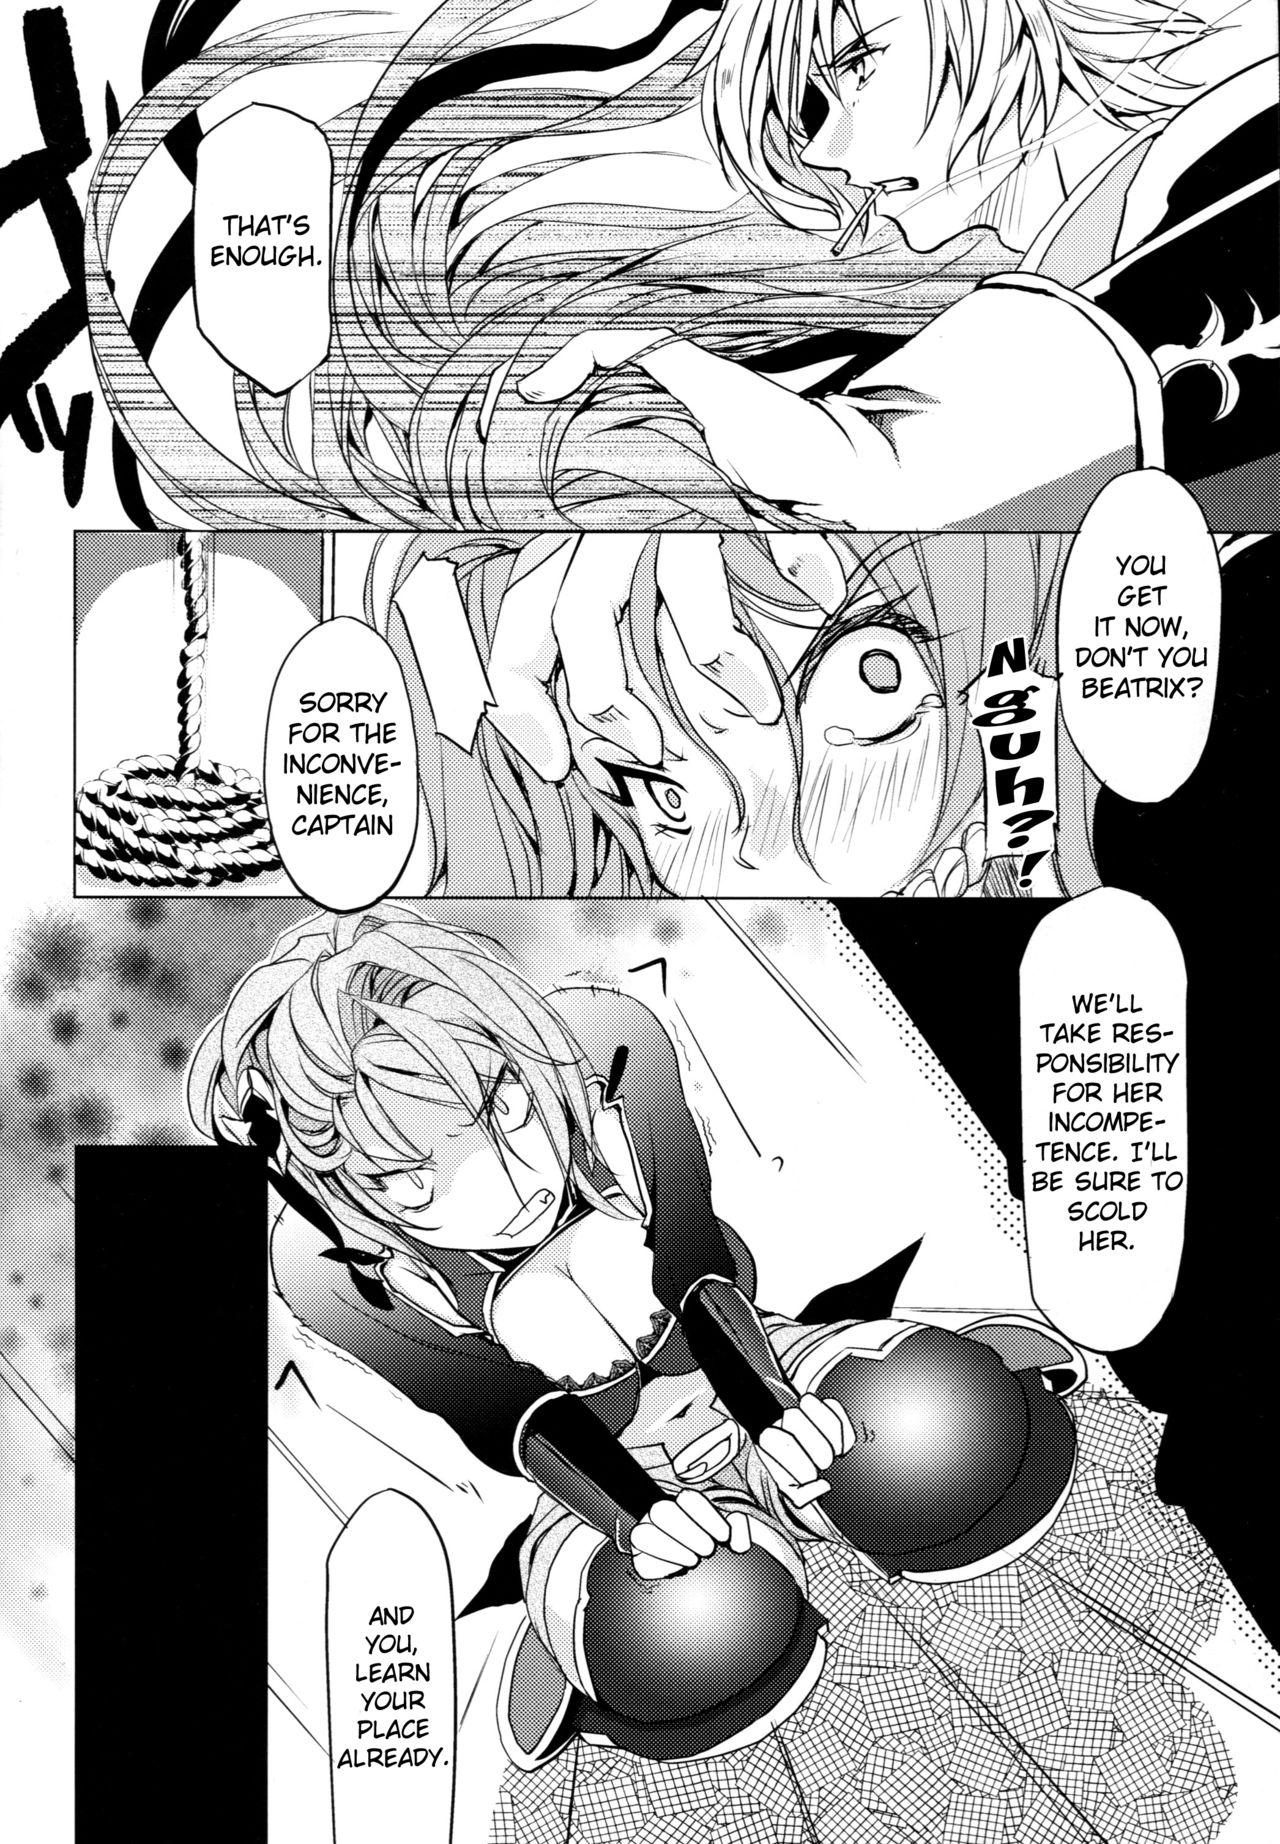 Oldvsyoung RISK DRUNKER - Granblue fantasy Thuylinh - Page 8